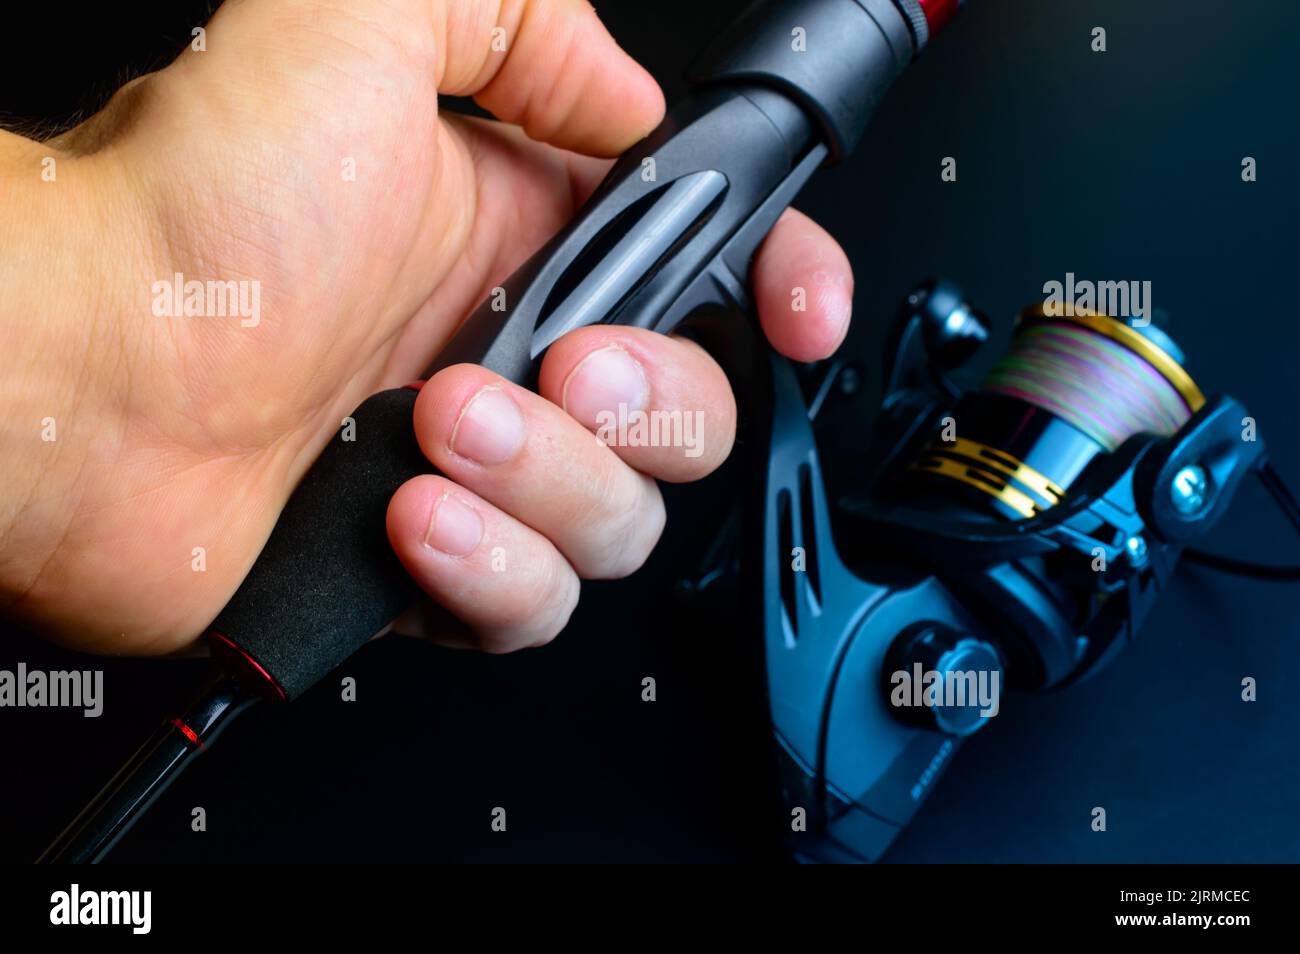 A child's hand holding Fishing rod with reel. Stock Photo